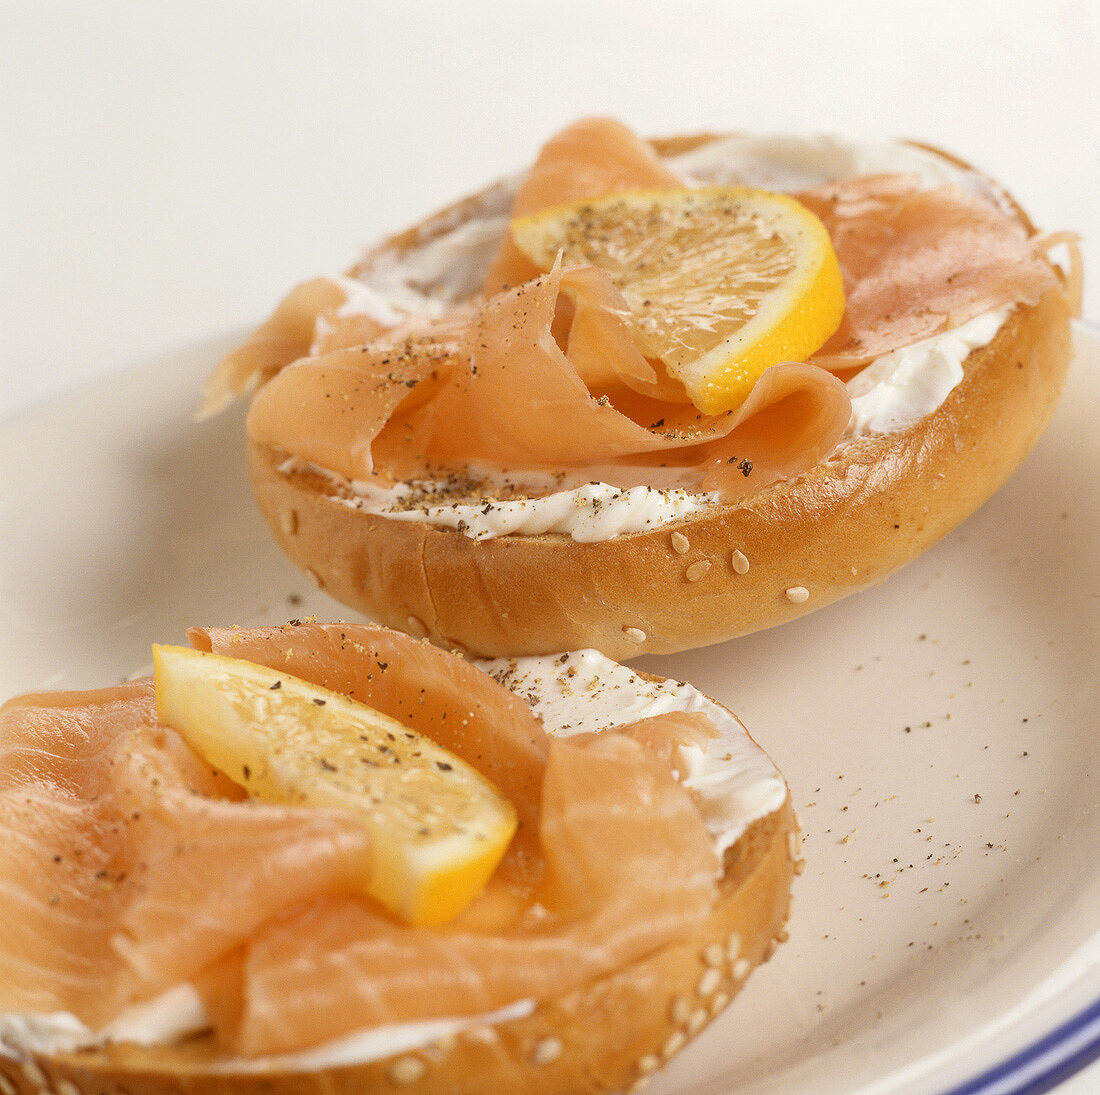 Bagel with cream cheese and smoked salmon